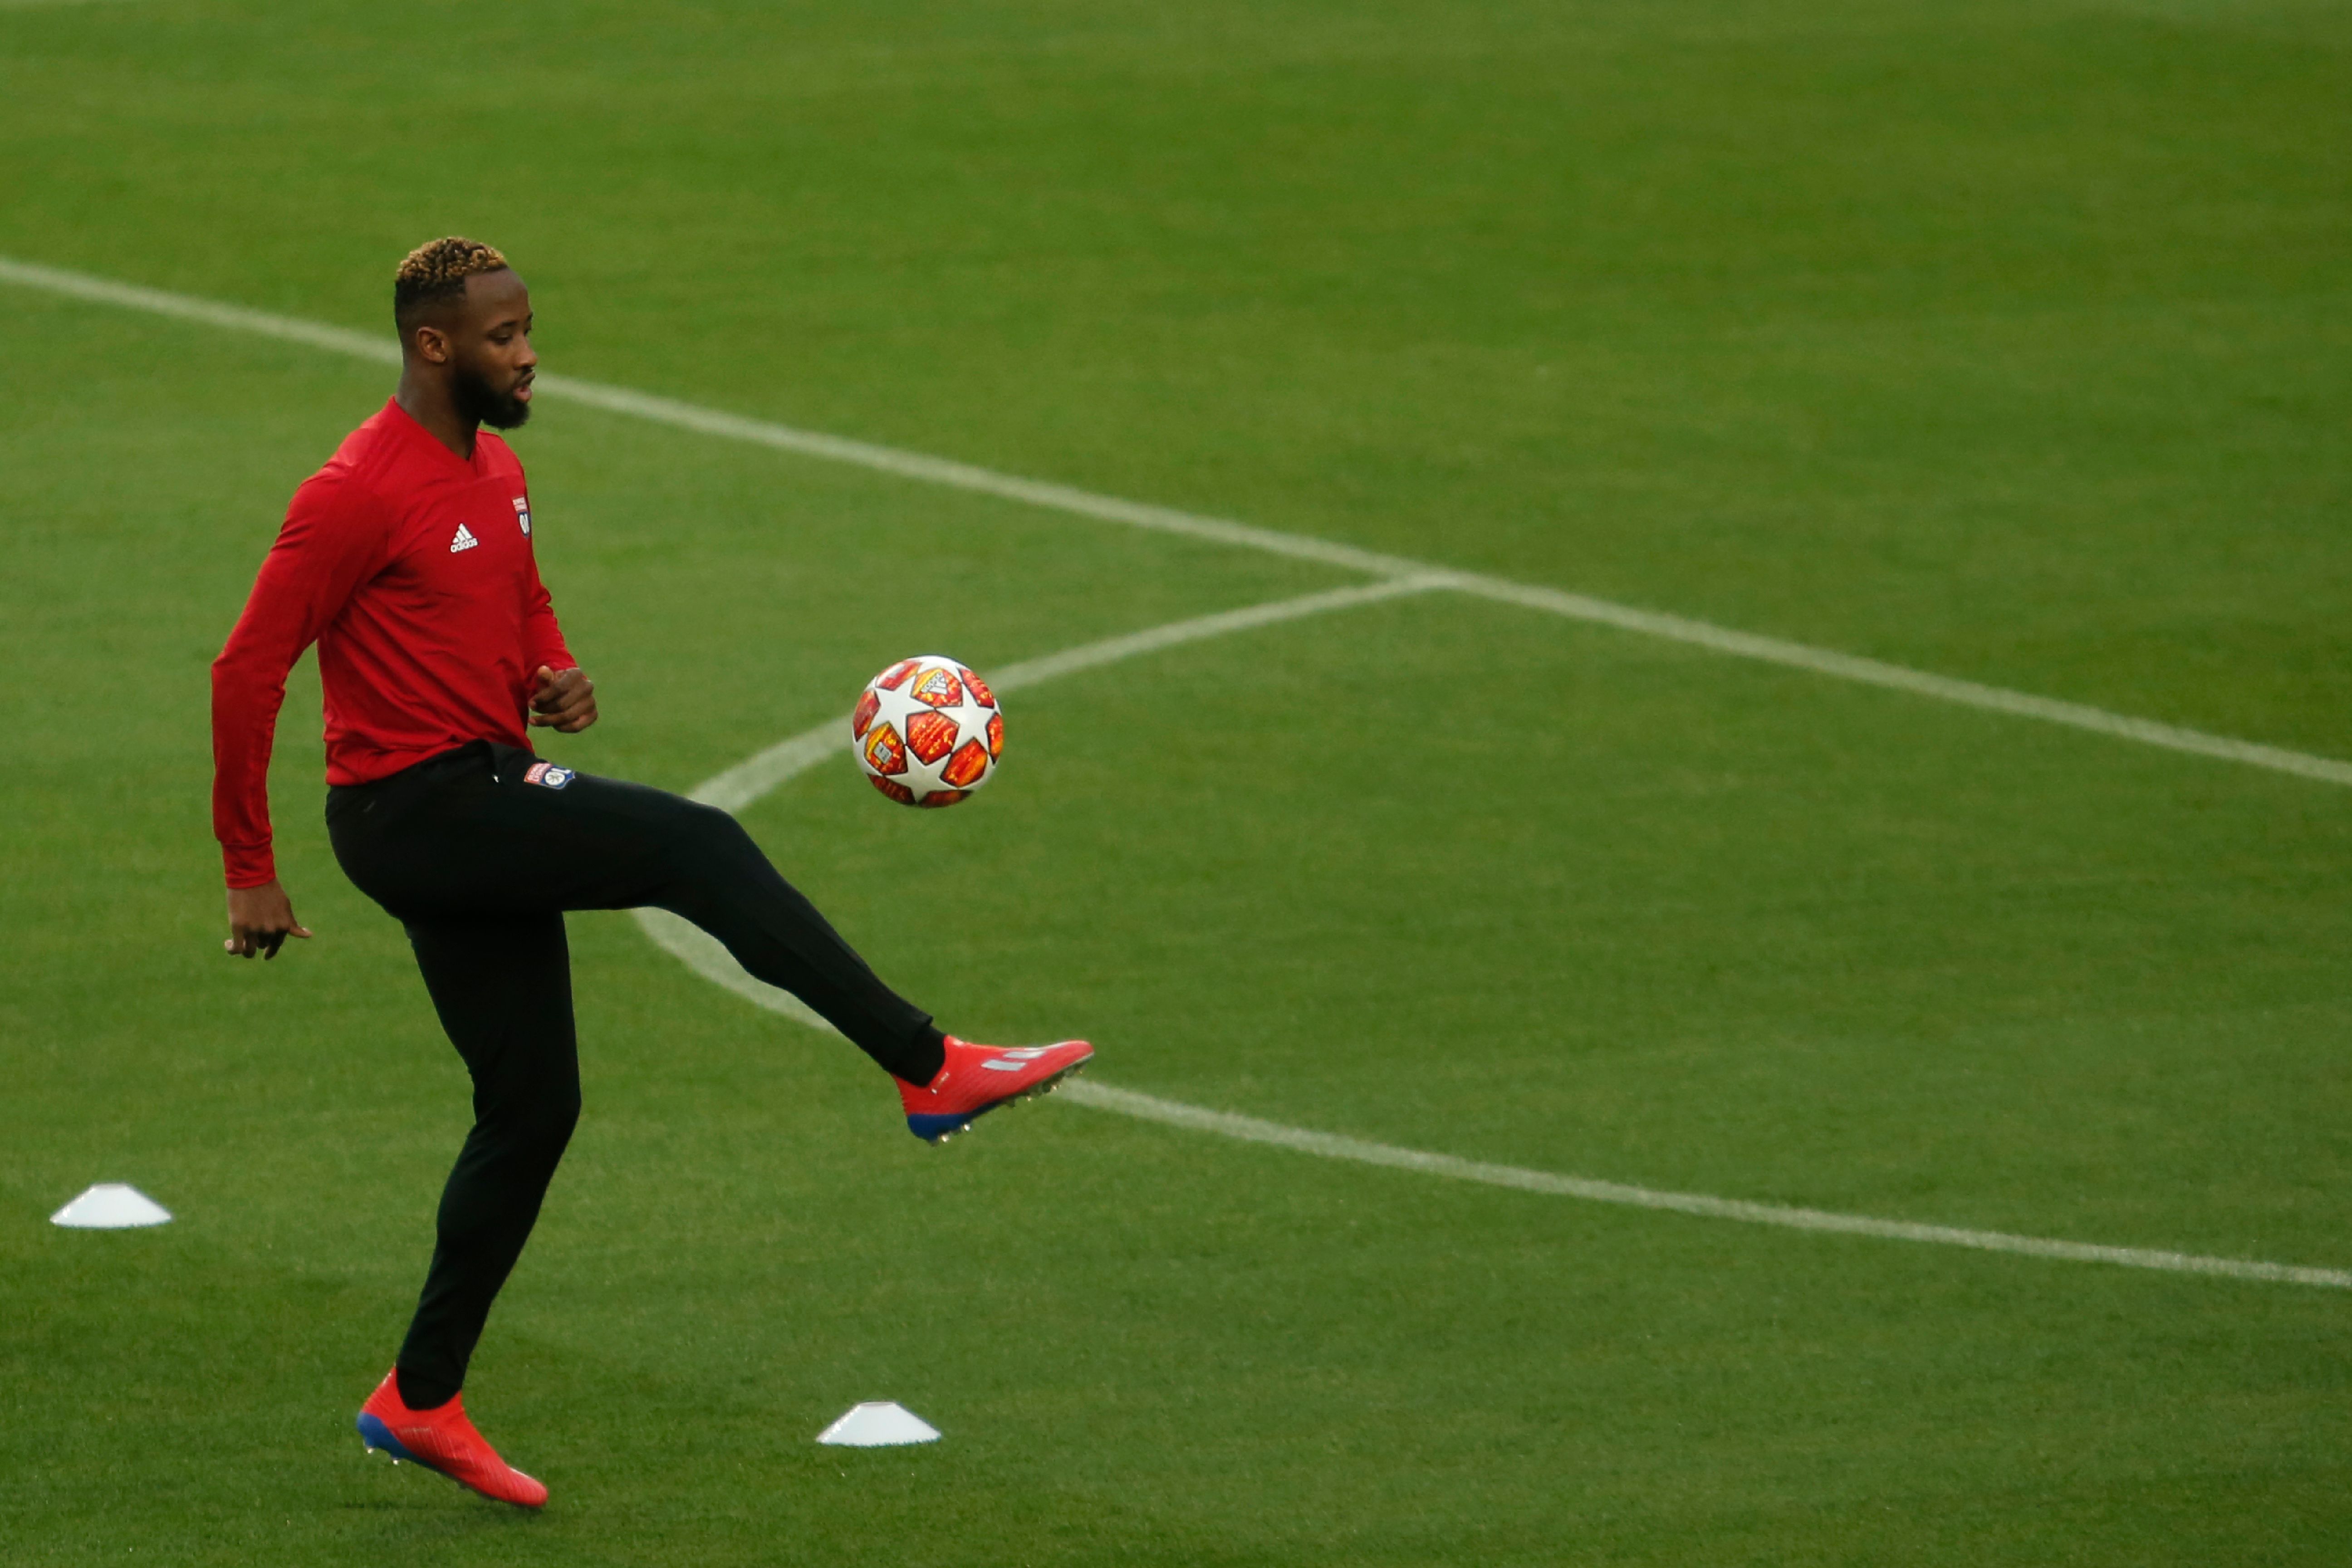 Lyon's French forward Moussa Dembele controls the ball during a training session at the Camp Nou stadium in Barcelona on March 12, 2019 on the eve of the Champions League round of 16, second leg football match between FC Barcelona and Olympique Lyonnais. (Photo by Pau Barrena / AFP)        (Photo credit should read PAU BARRENA/AFP/Getty Images)